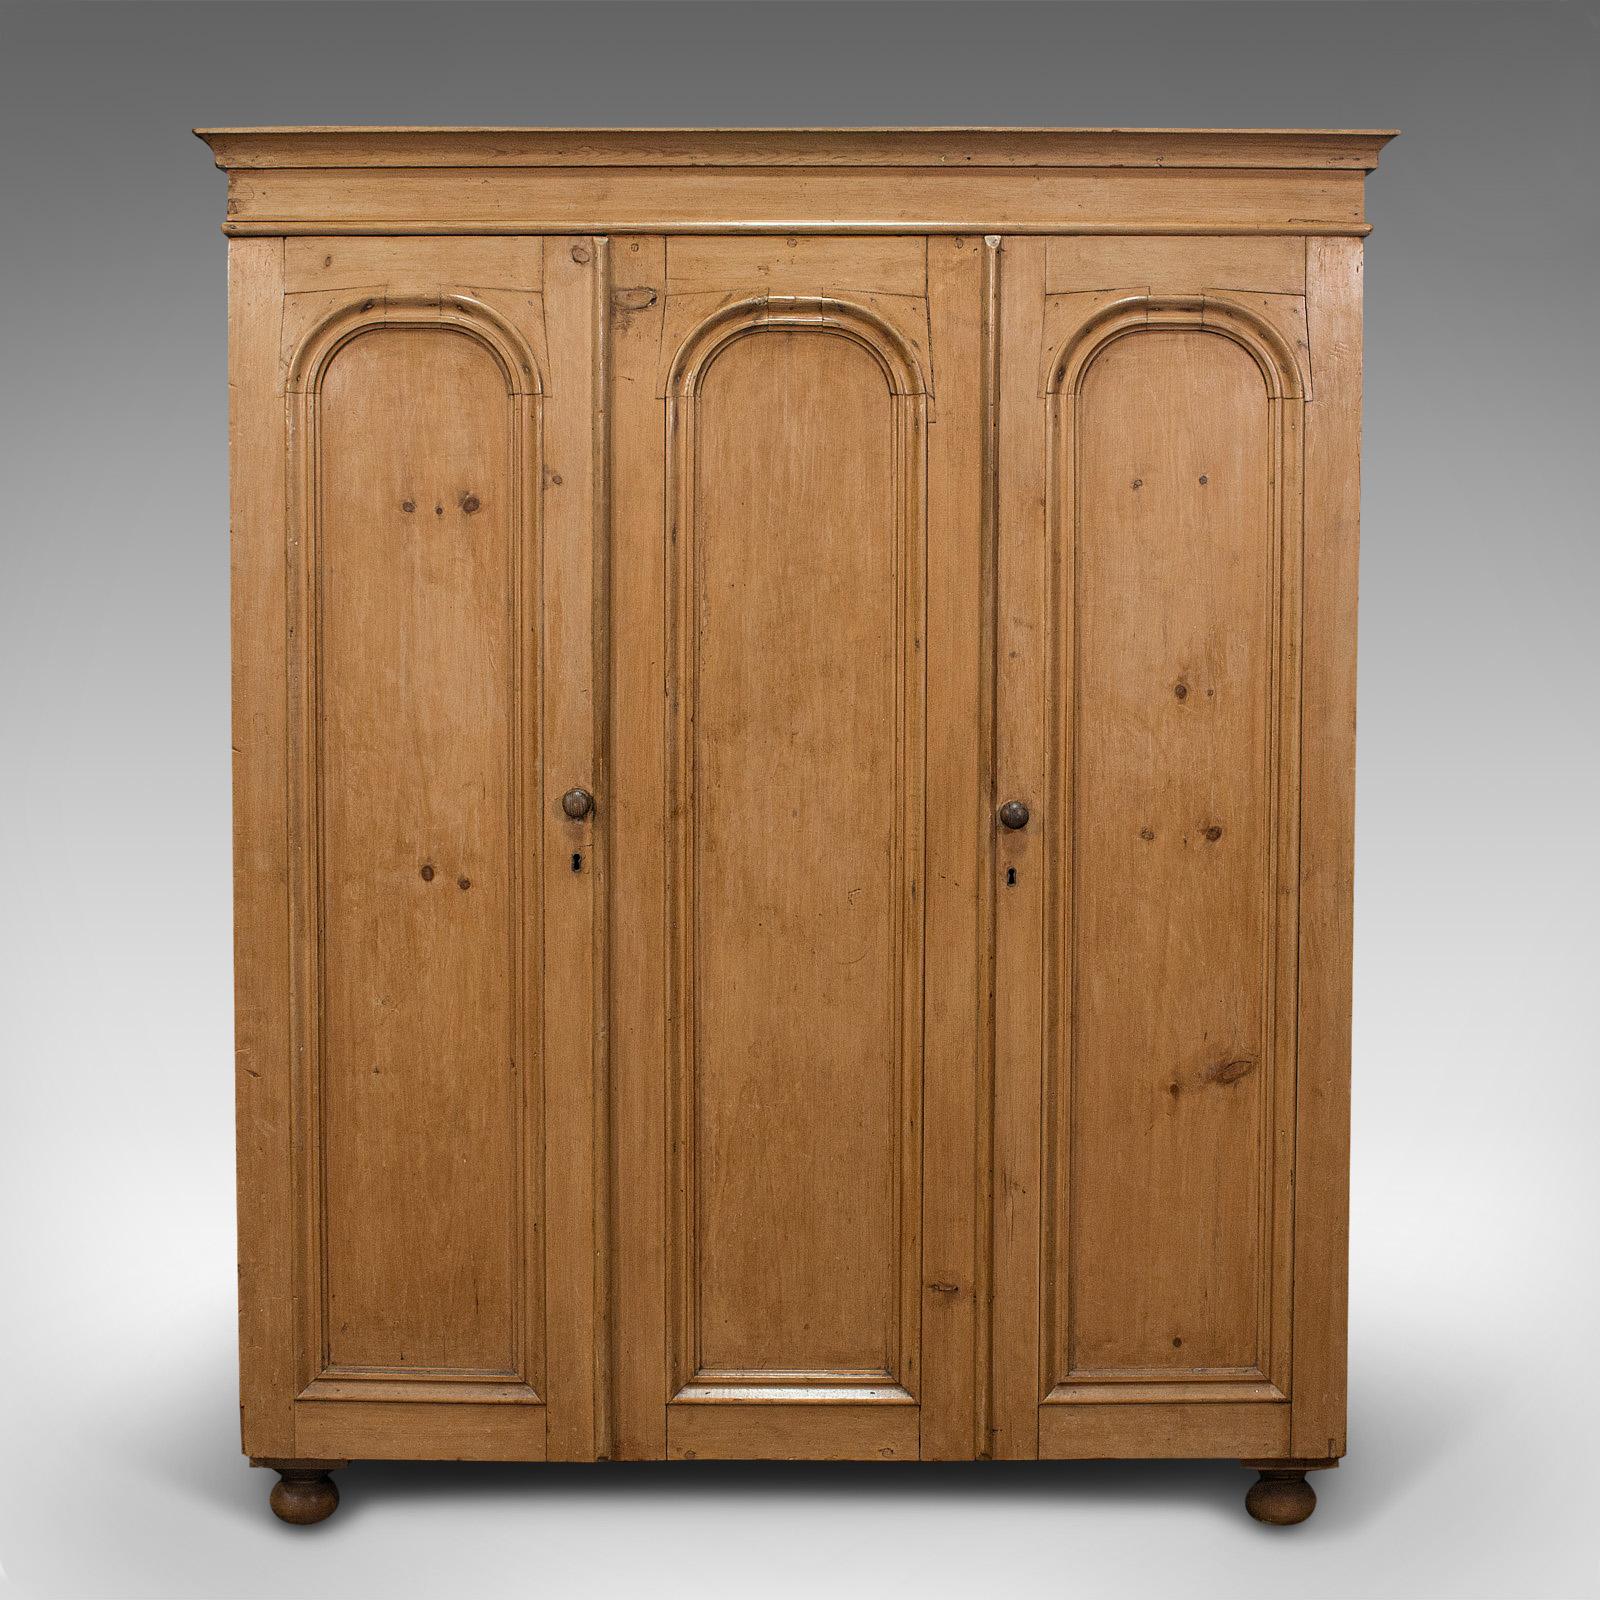 This is an antique three panel wardrobe. An English, pine cupboard or closet, dating to the late Victorian period, circa 1900.

Delightful Victorian wardrobe with nice colour
Displays a desirable aged patina
Select pine shows fine grain interest